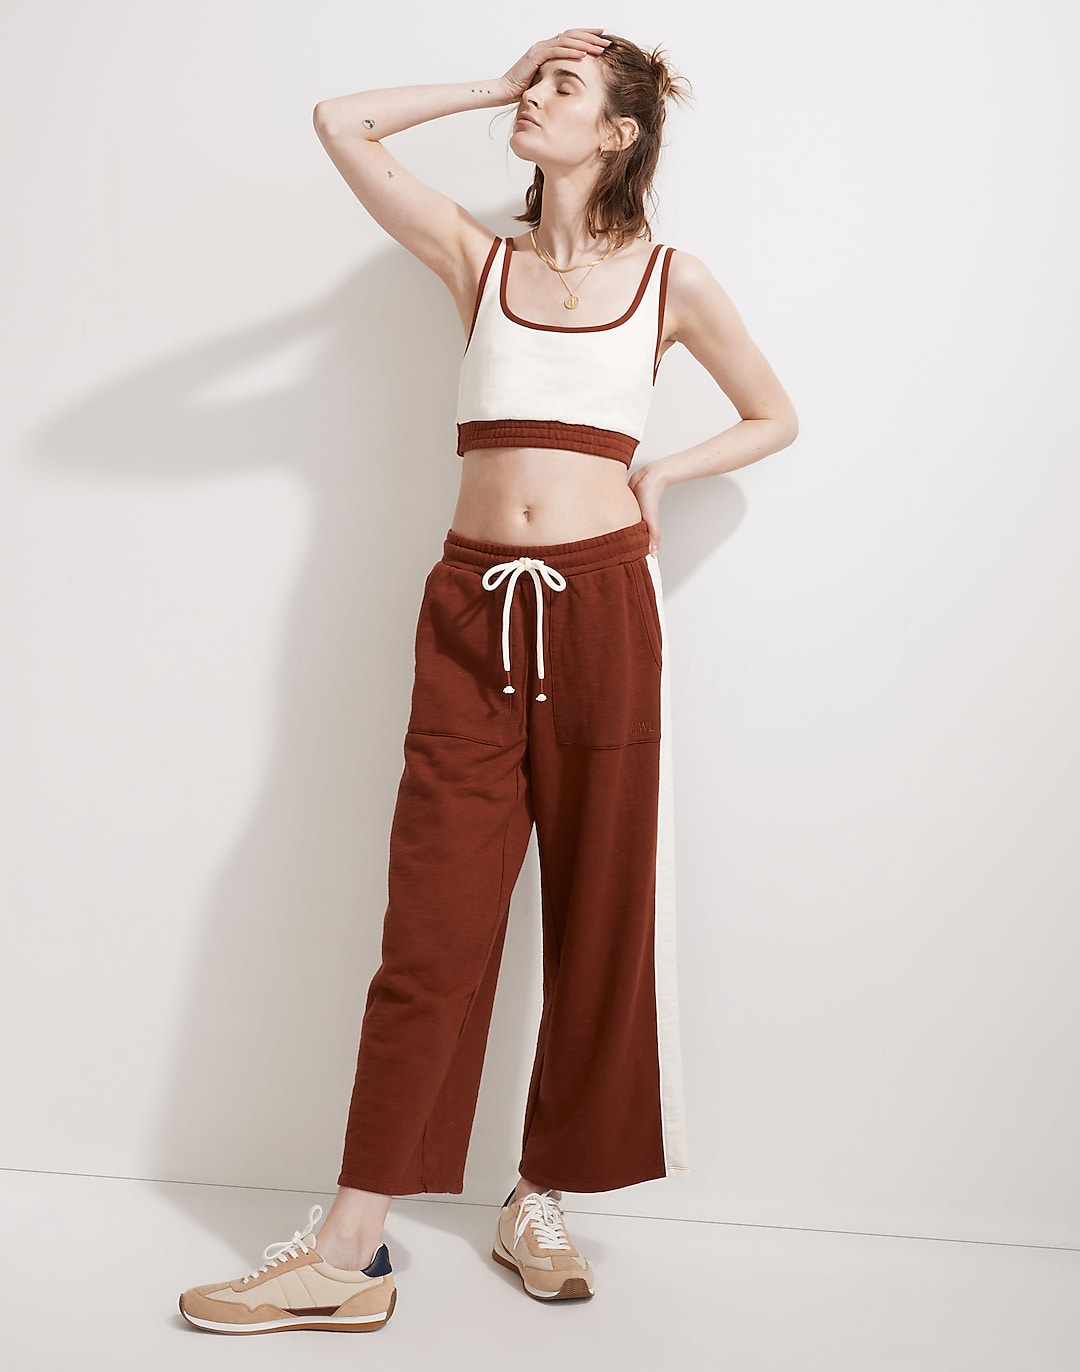 The Wide Leg Cropped Sweatpants